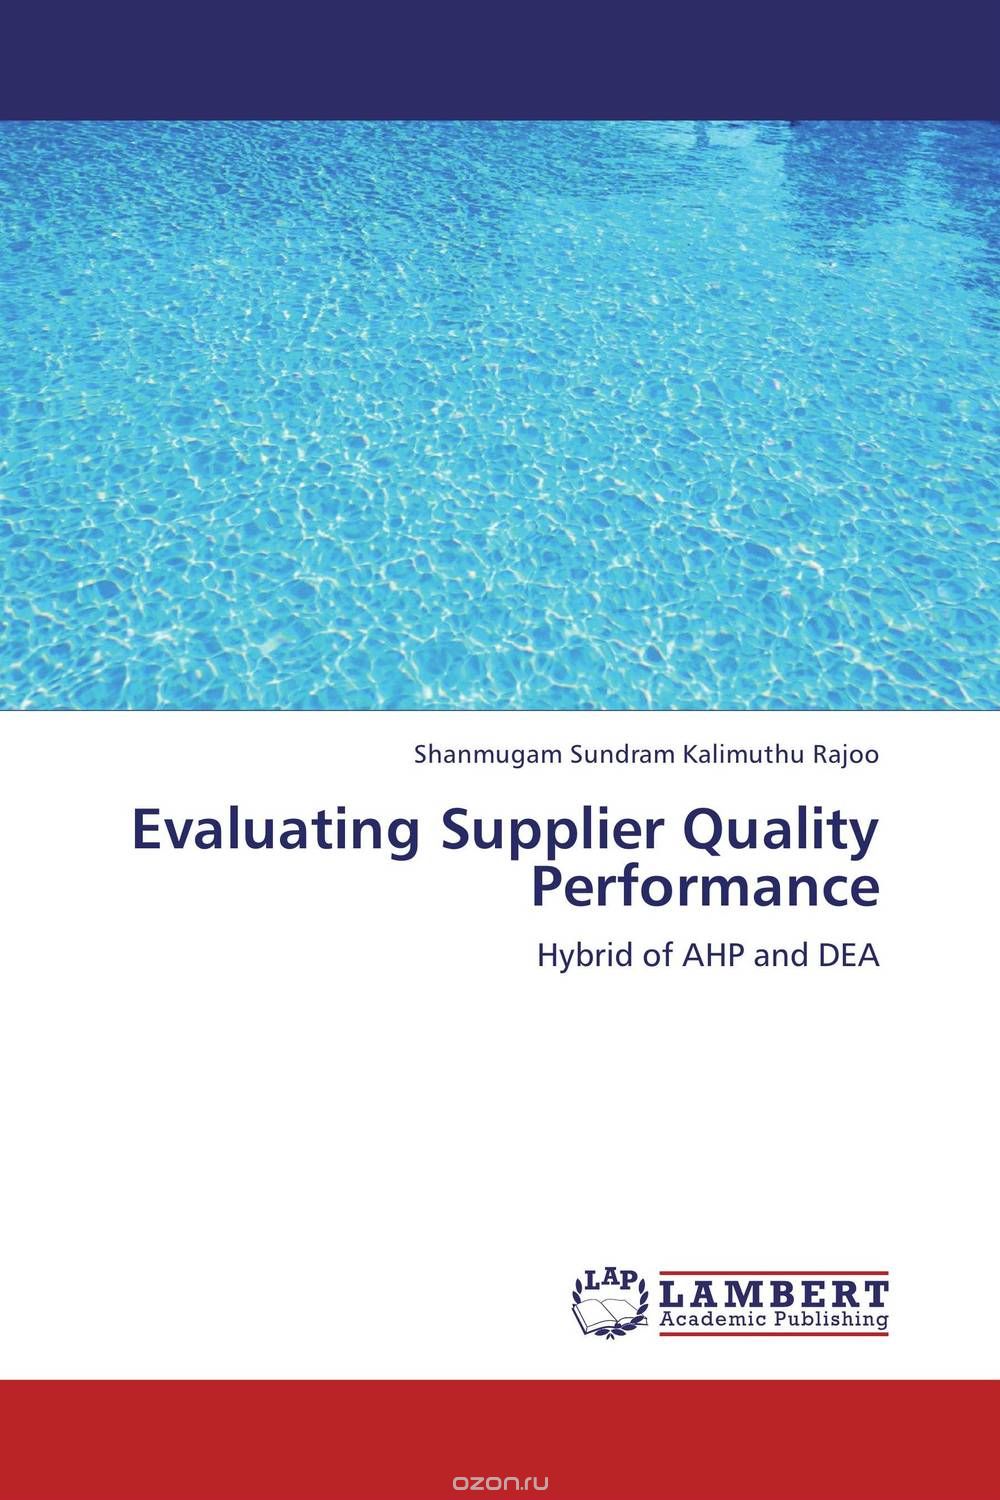 Evaluating Supplier Quality Performance